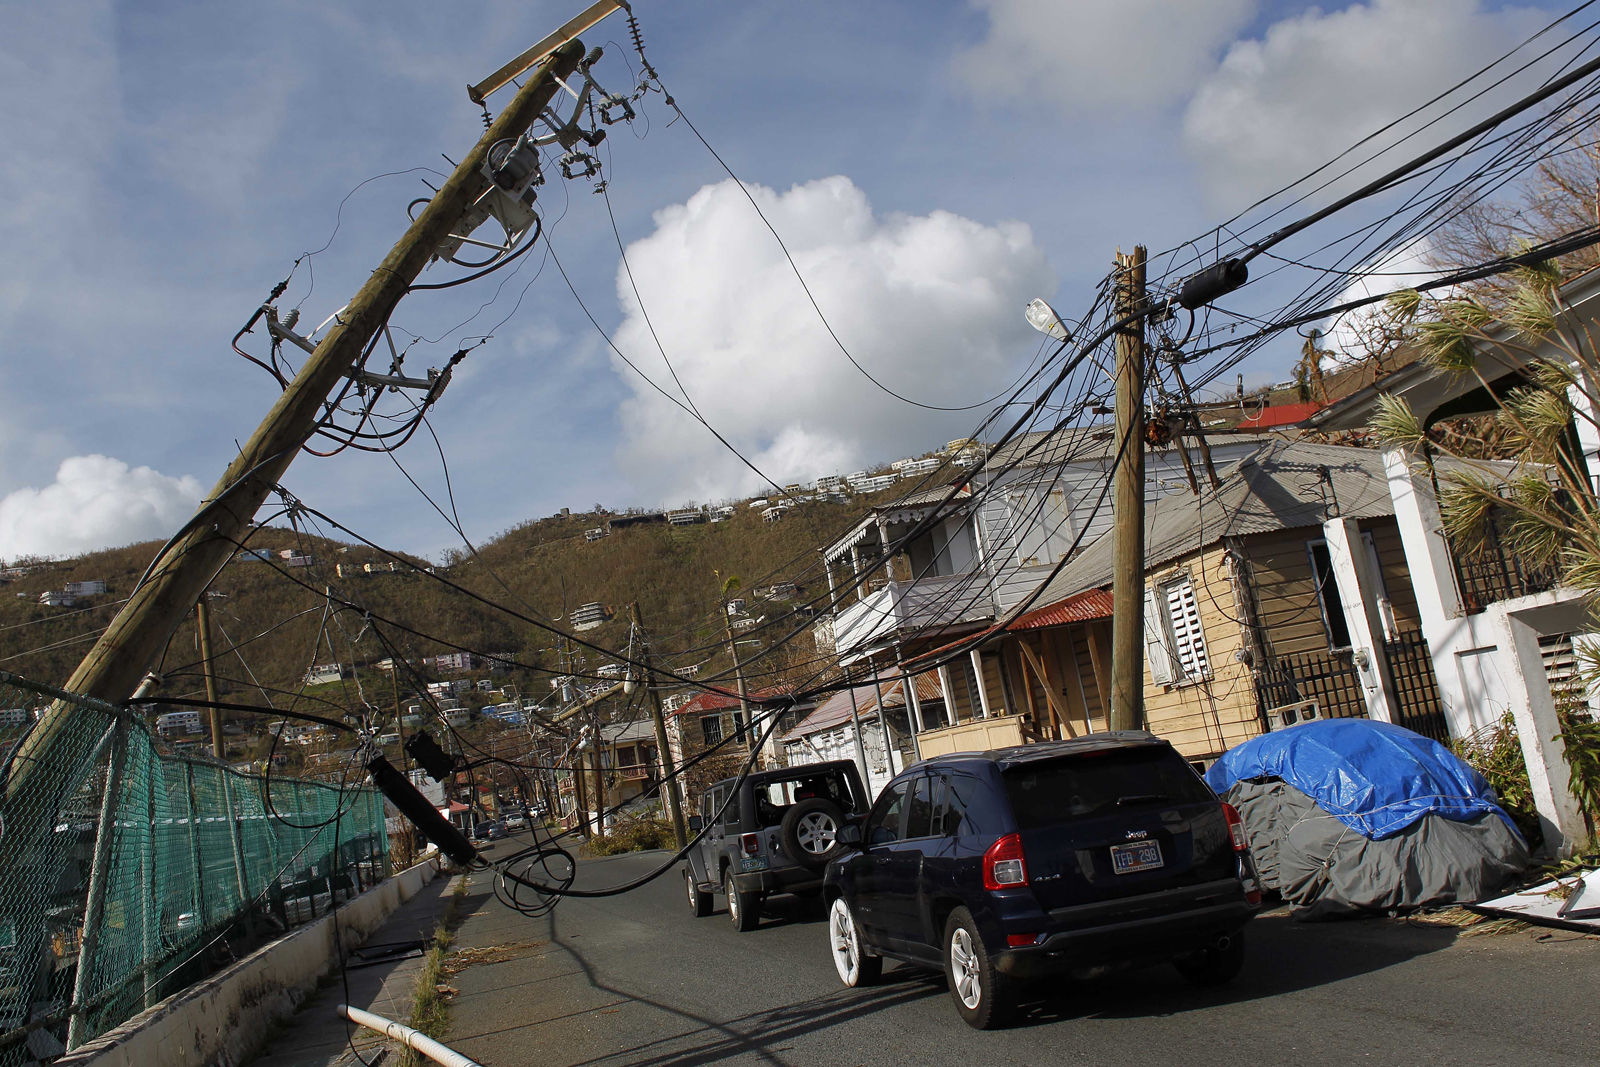 Power lines are damaged after the passage of Hurricane Irma in Charlotte Amalie, St. Thomas, U.S. Virgin Islands, Sunday, Sept. 10, 2017.  The storm ravaged such lush resort islands as St. Martin, St. Barts, St. Thomas, Barbuda and Anguilla. (AP Photo/Ricardo Arduengo)